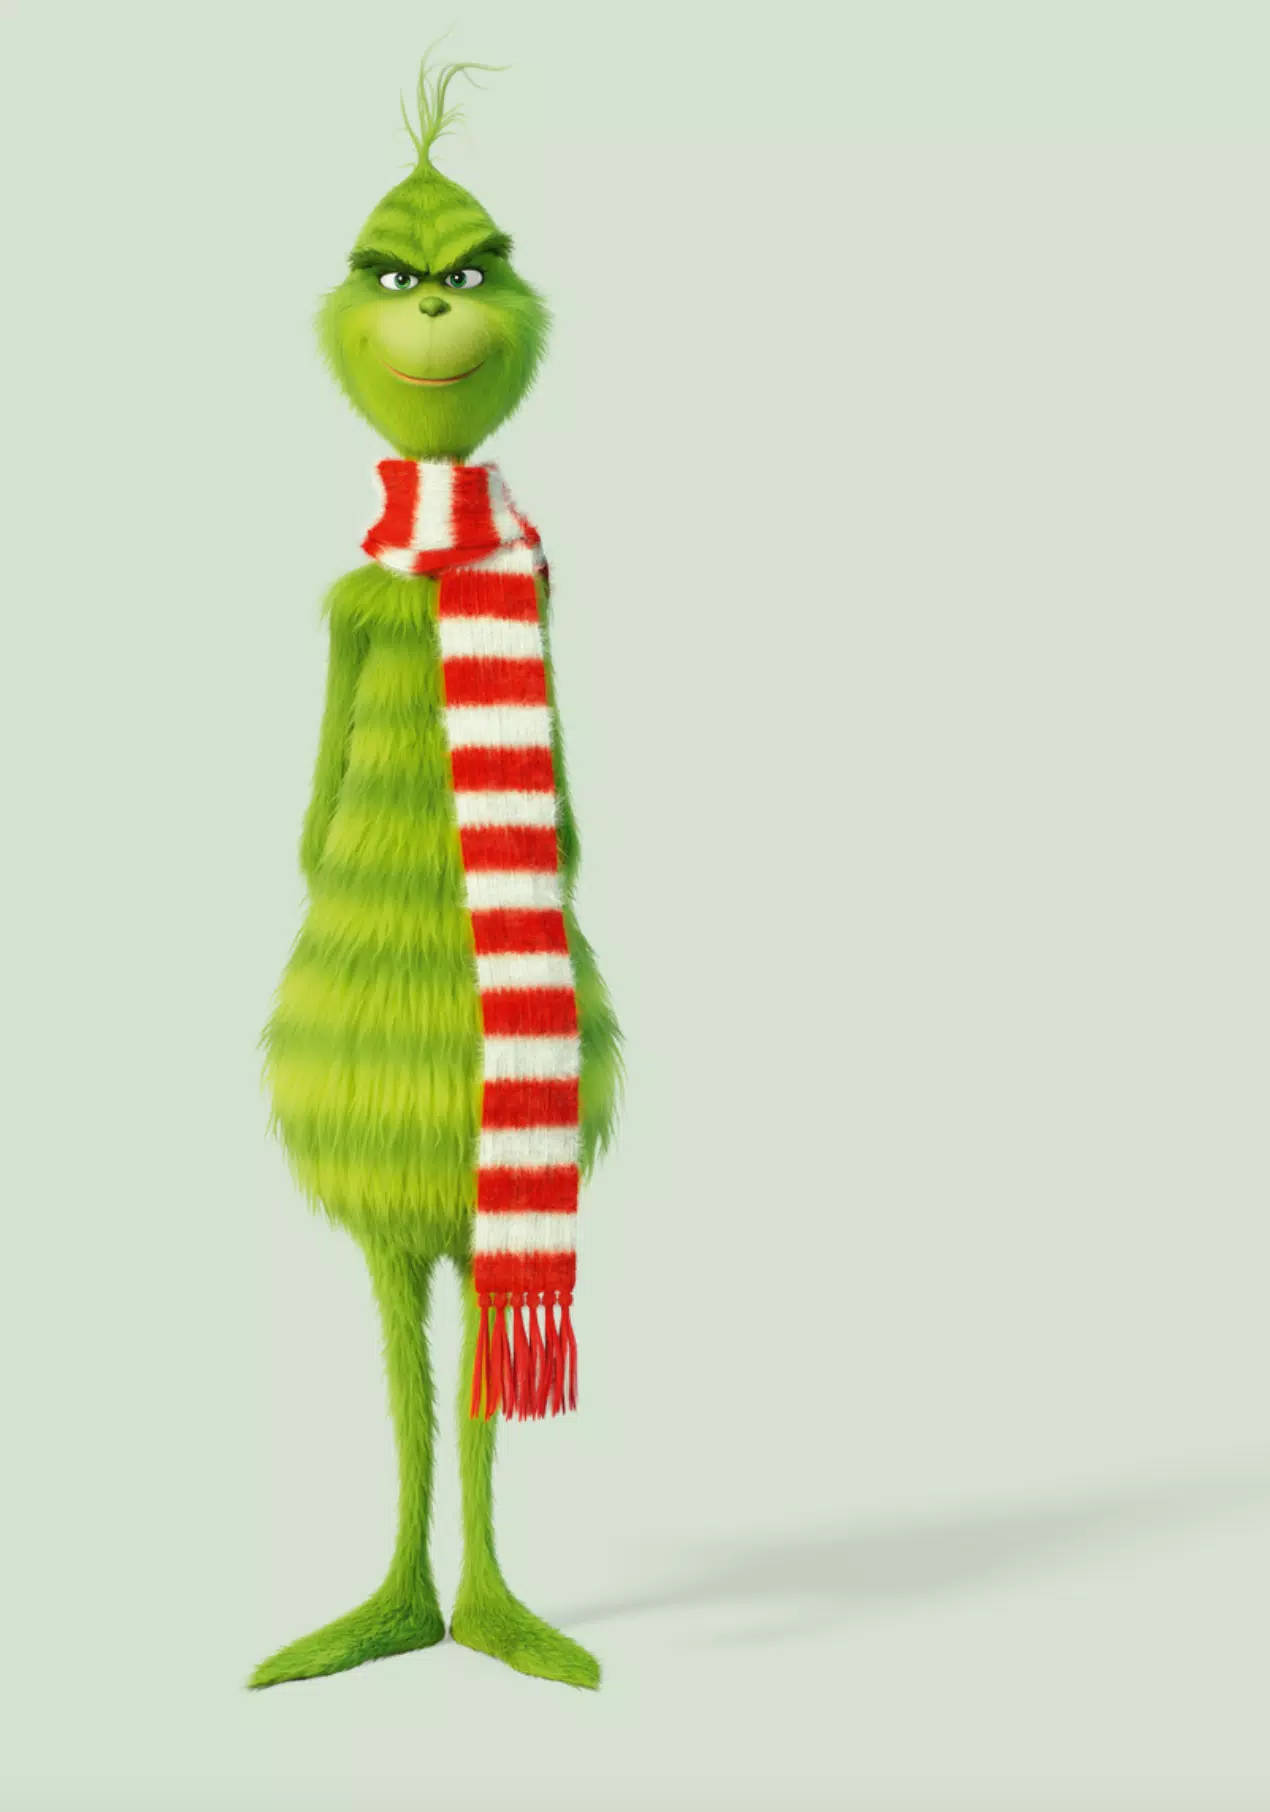 The Grinch Red And White Scarf Background